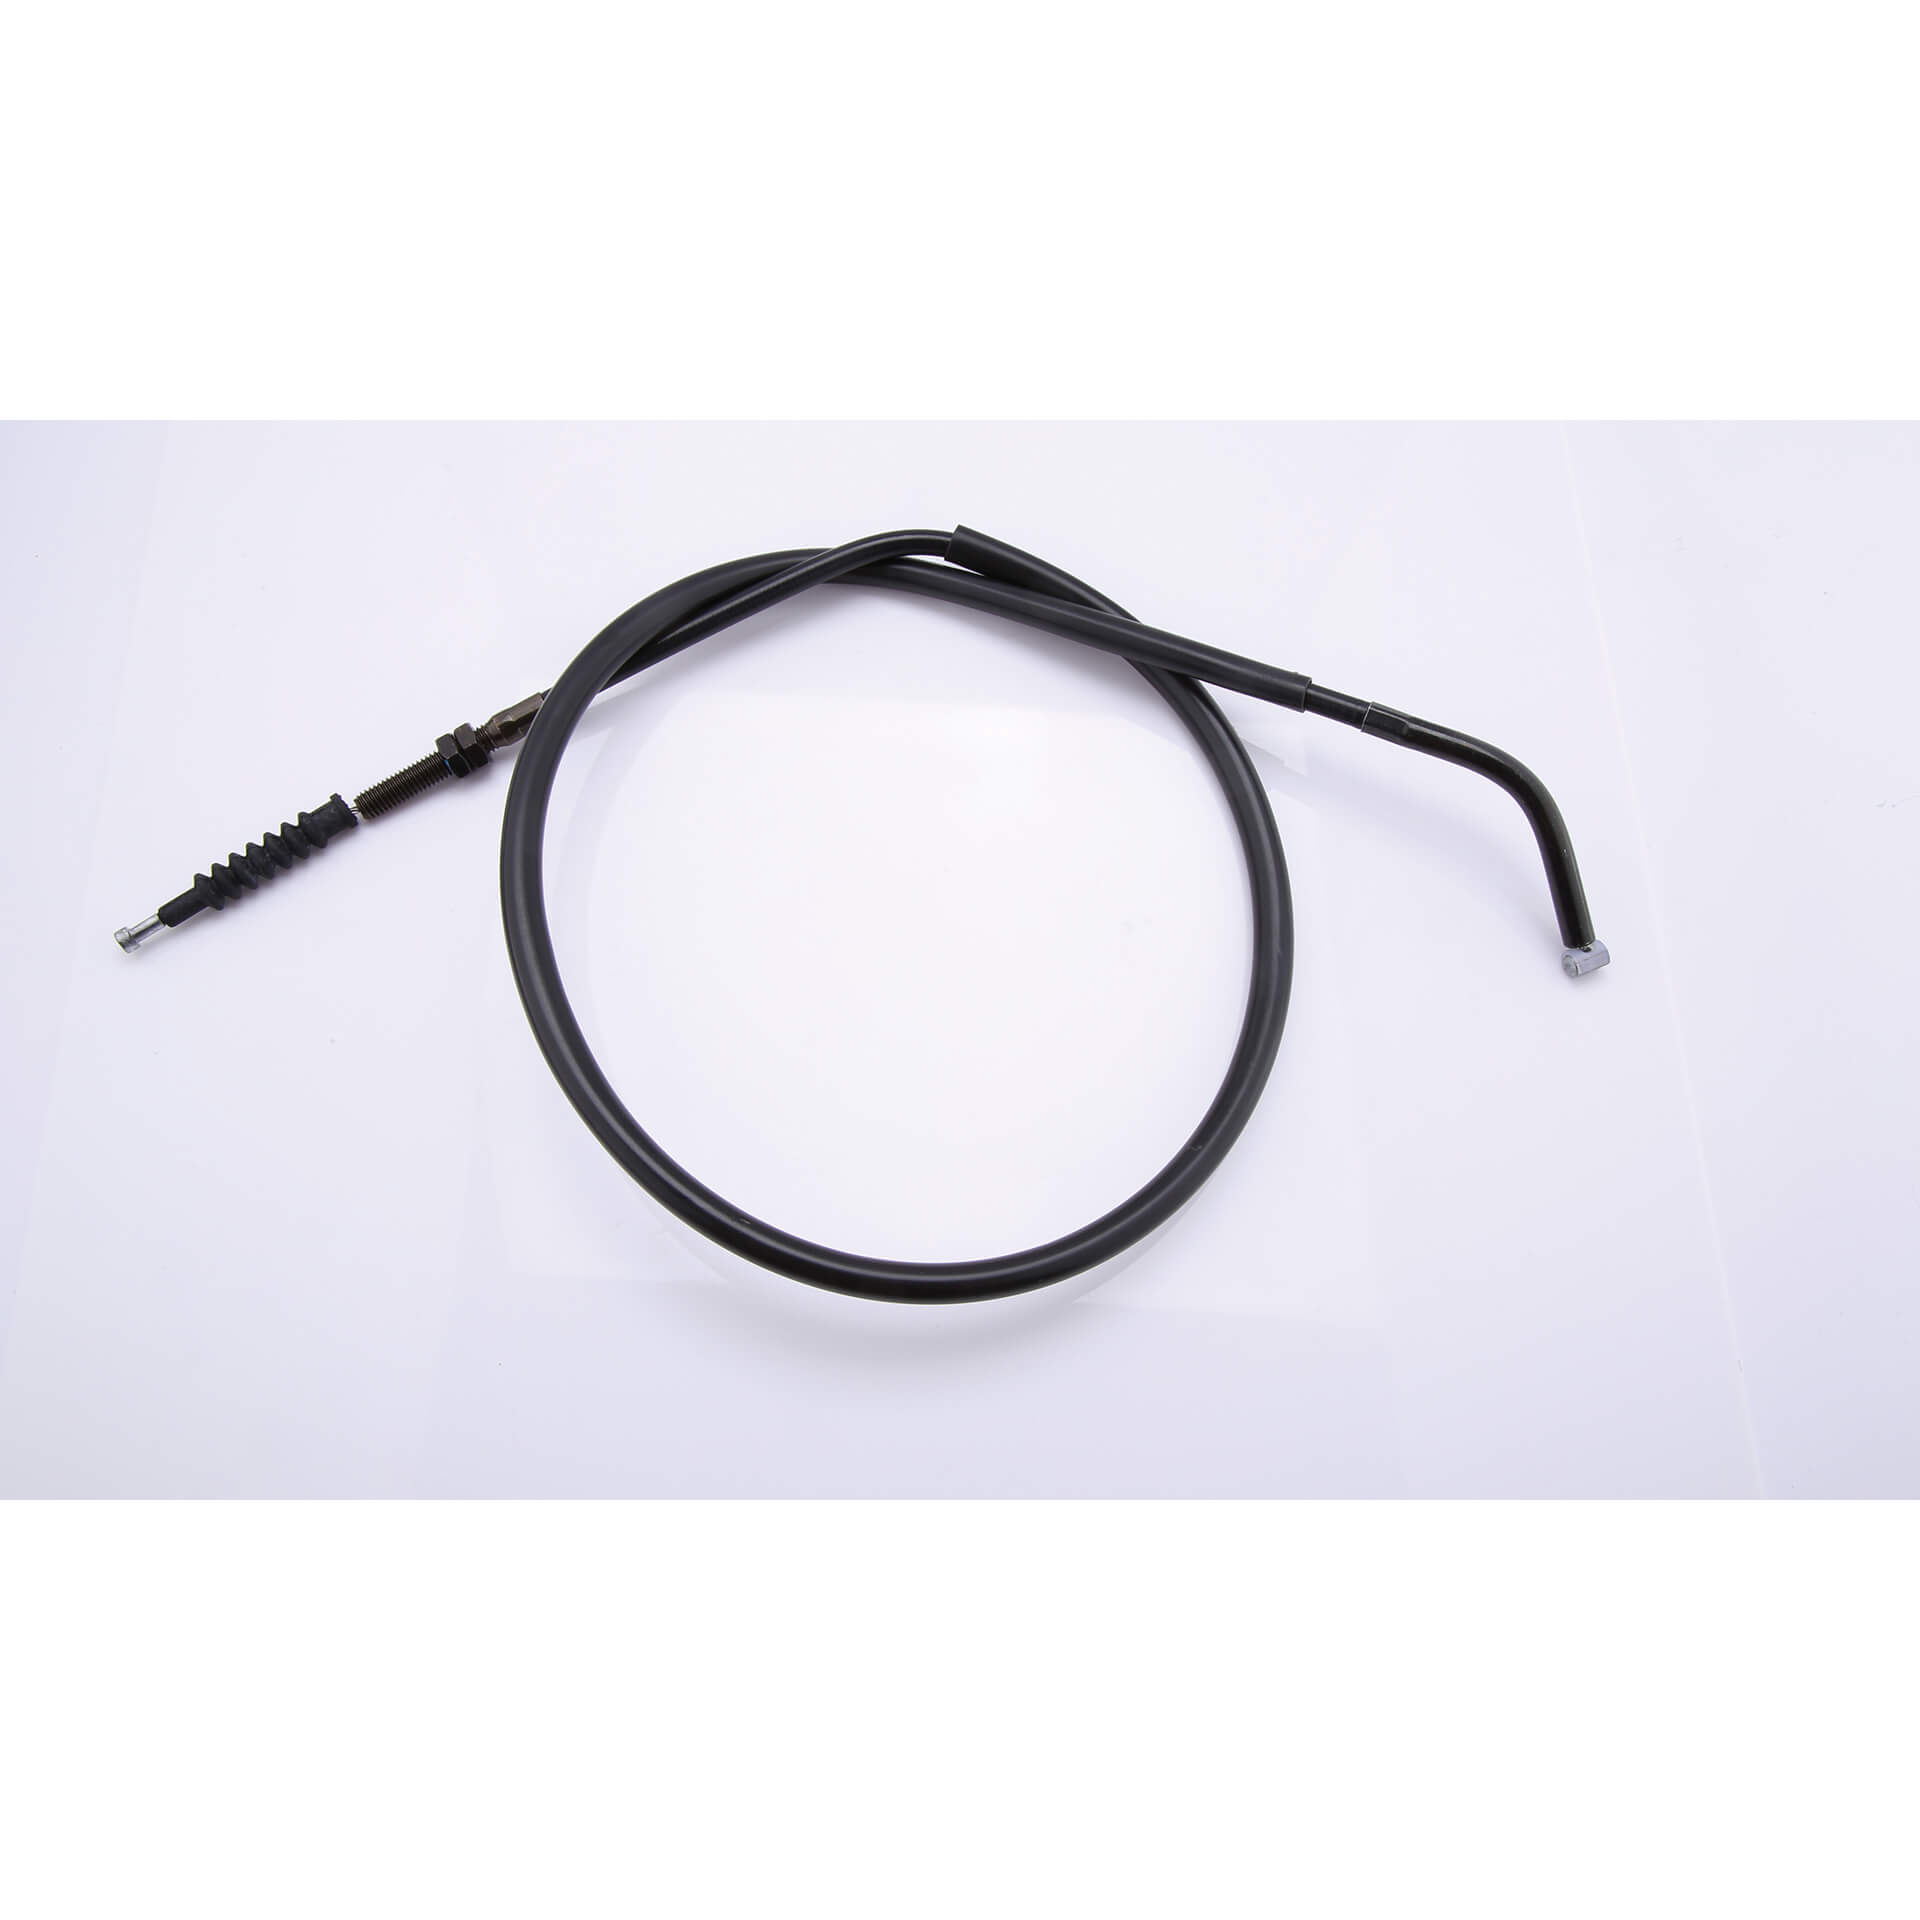 lsl Spare part, clutch cable for various SB-Kits